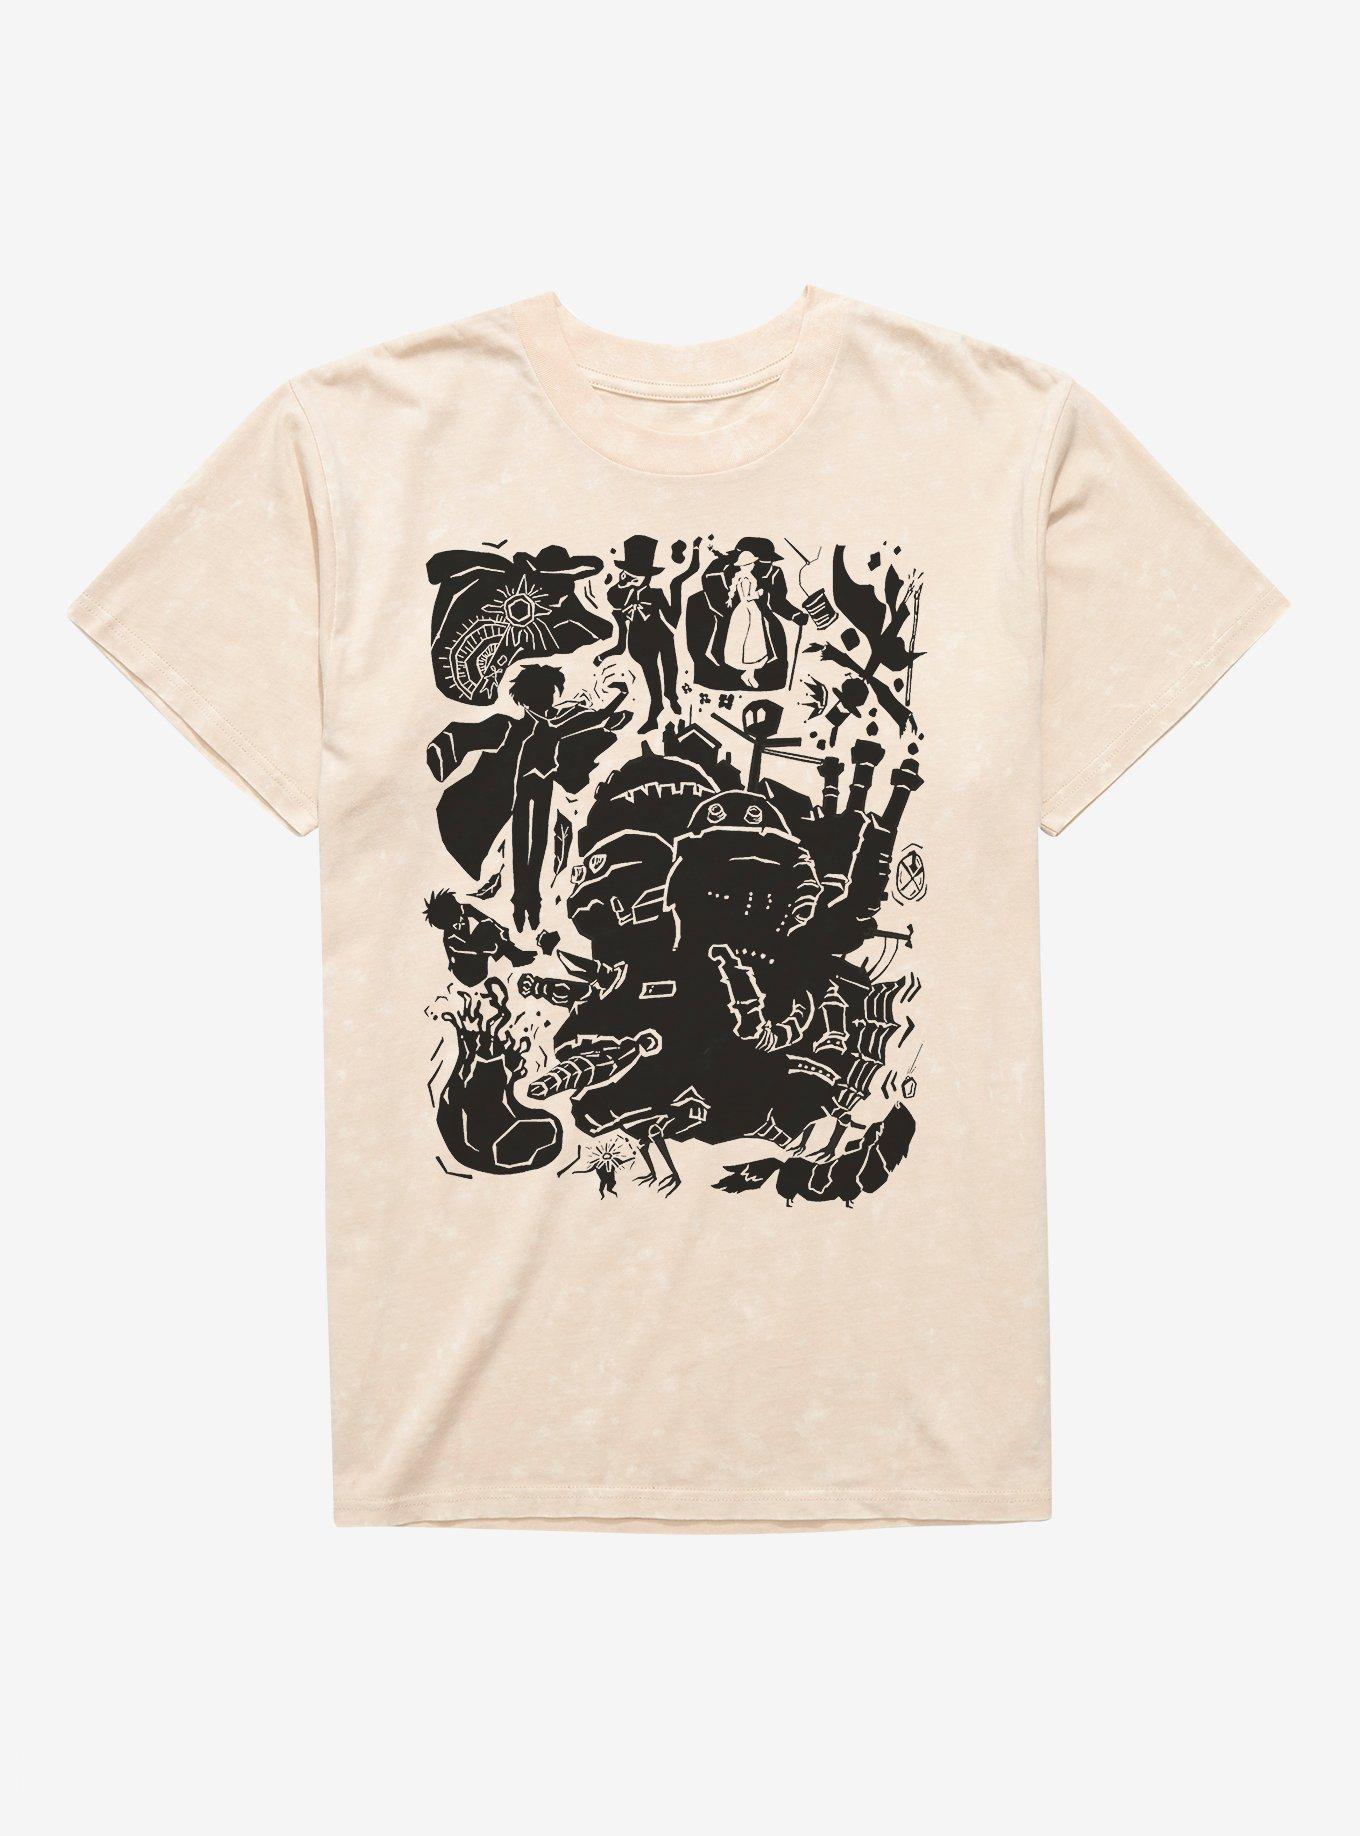 Studio Ghibli Howl's Moving Castle Icons Mineral Wash T-Shirt ...